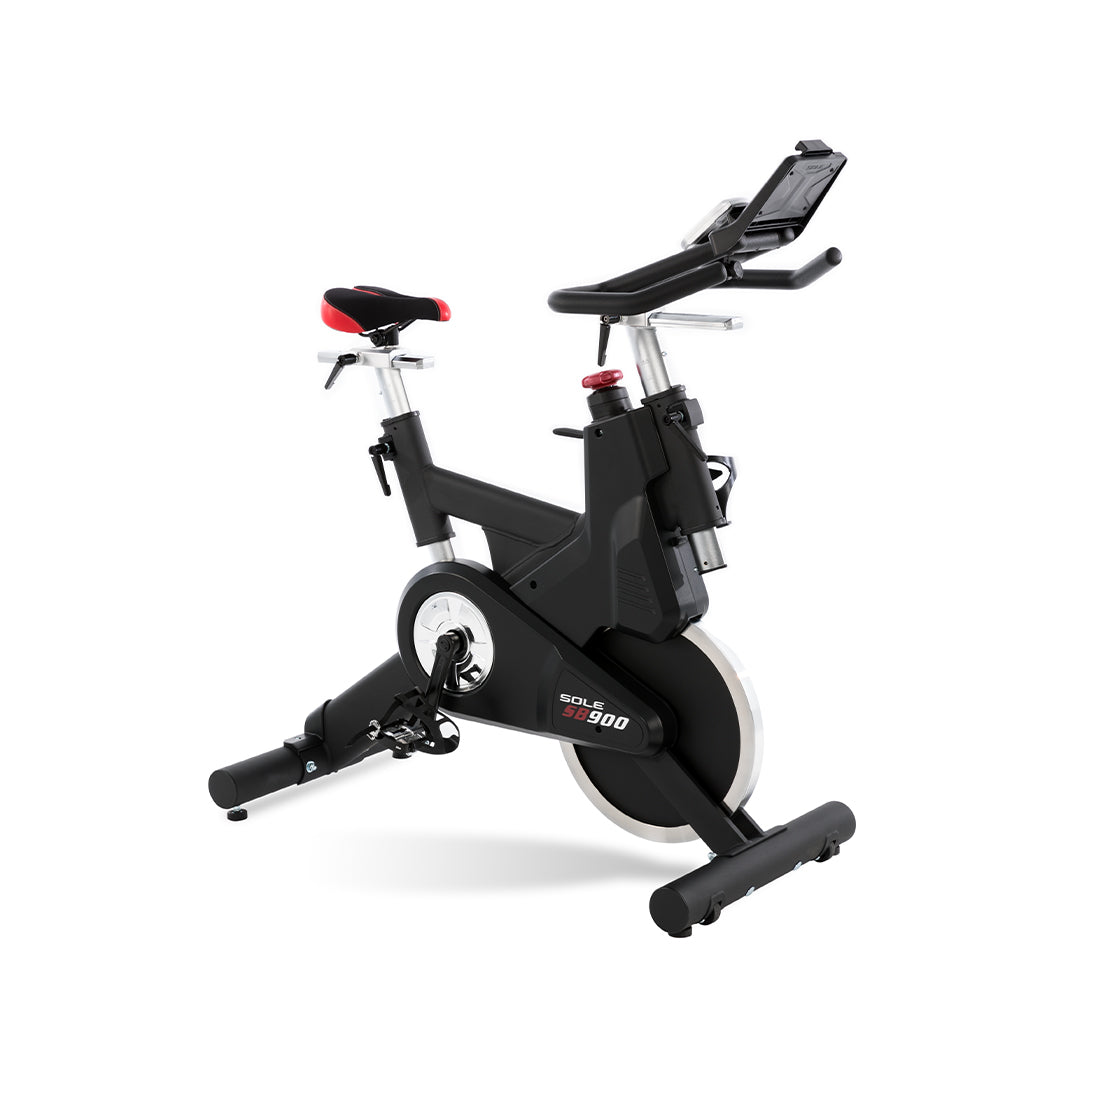 Sole SB900 Fitness Spin Exercise Bike - Display Set